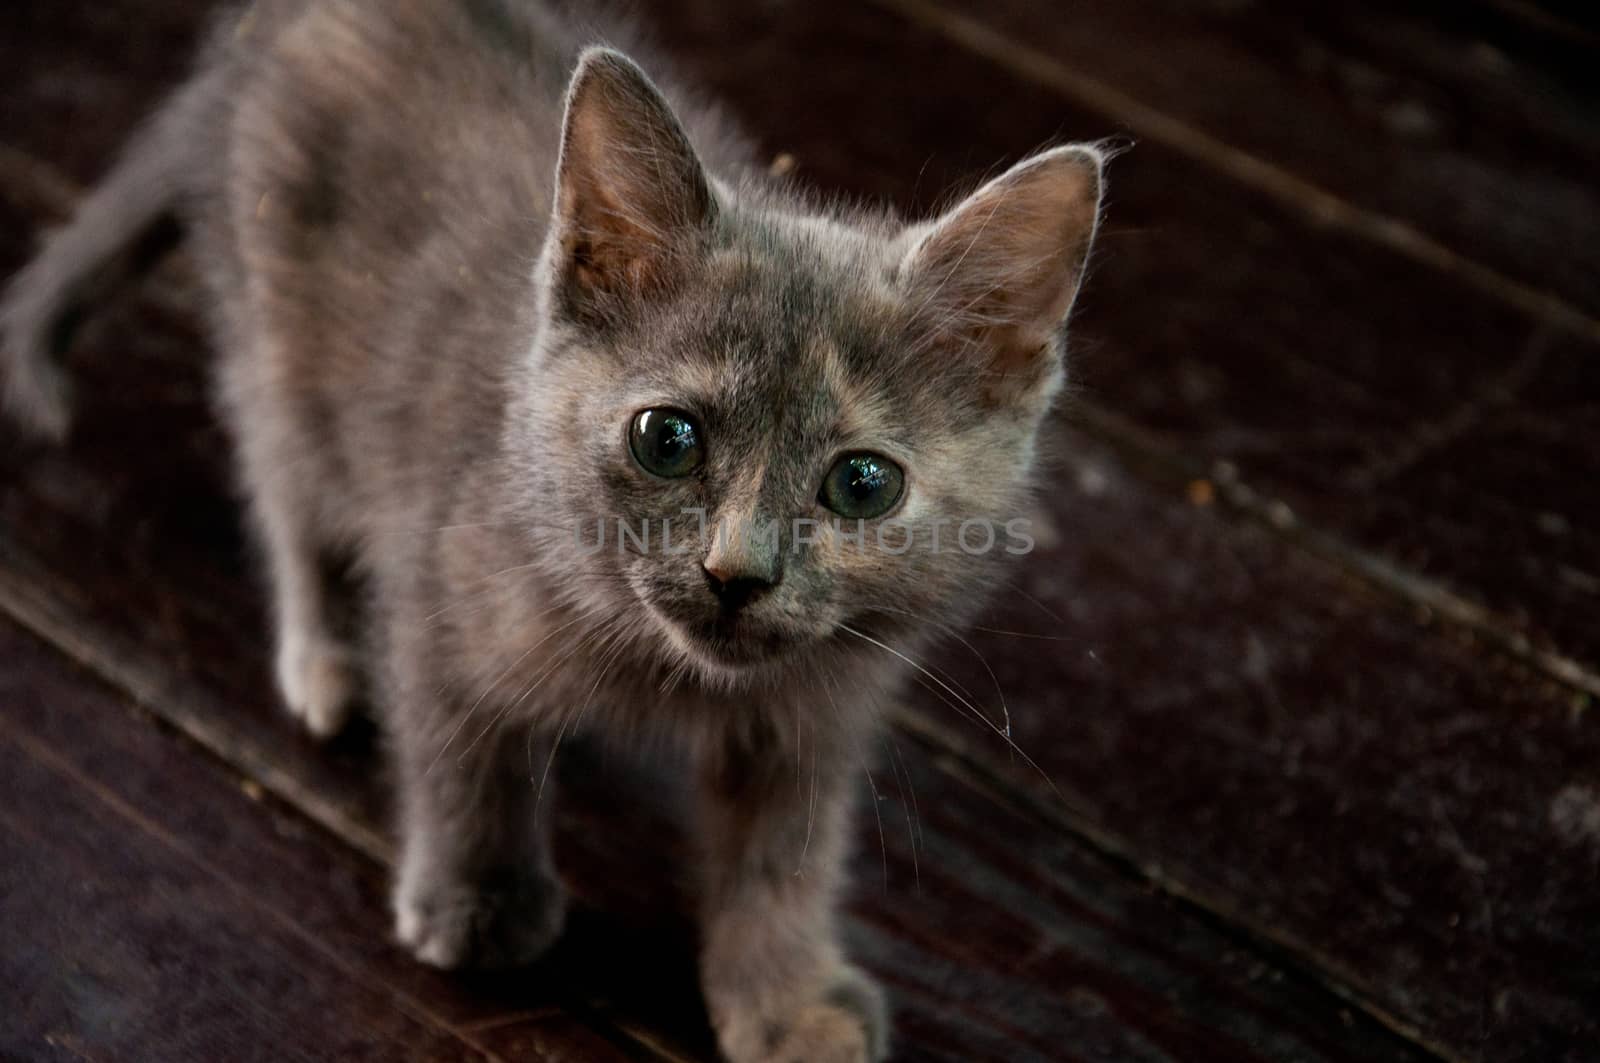 Gray baby cat interested in camera